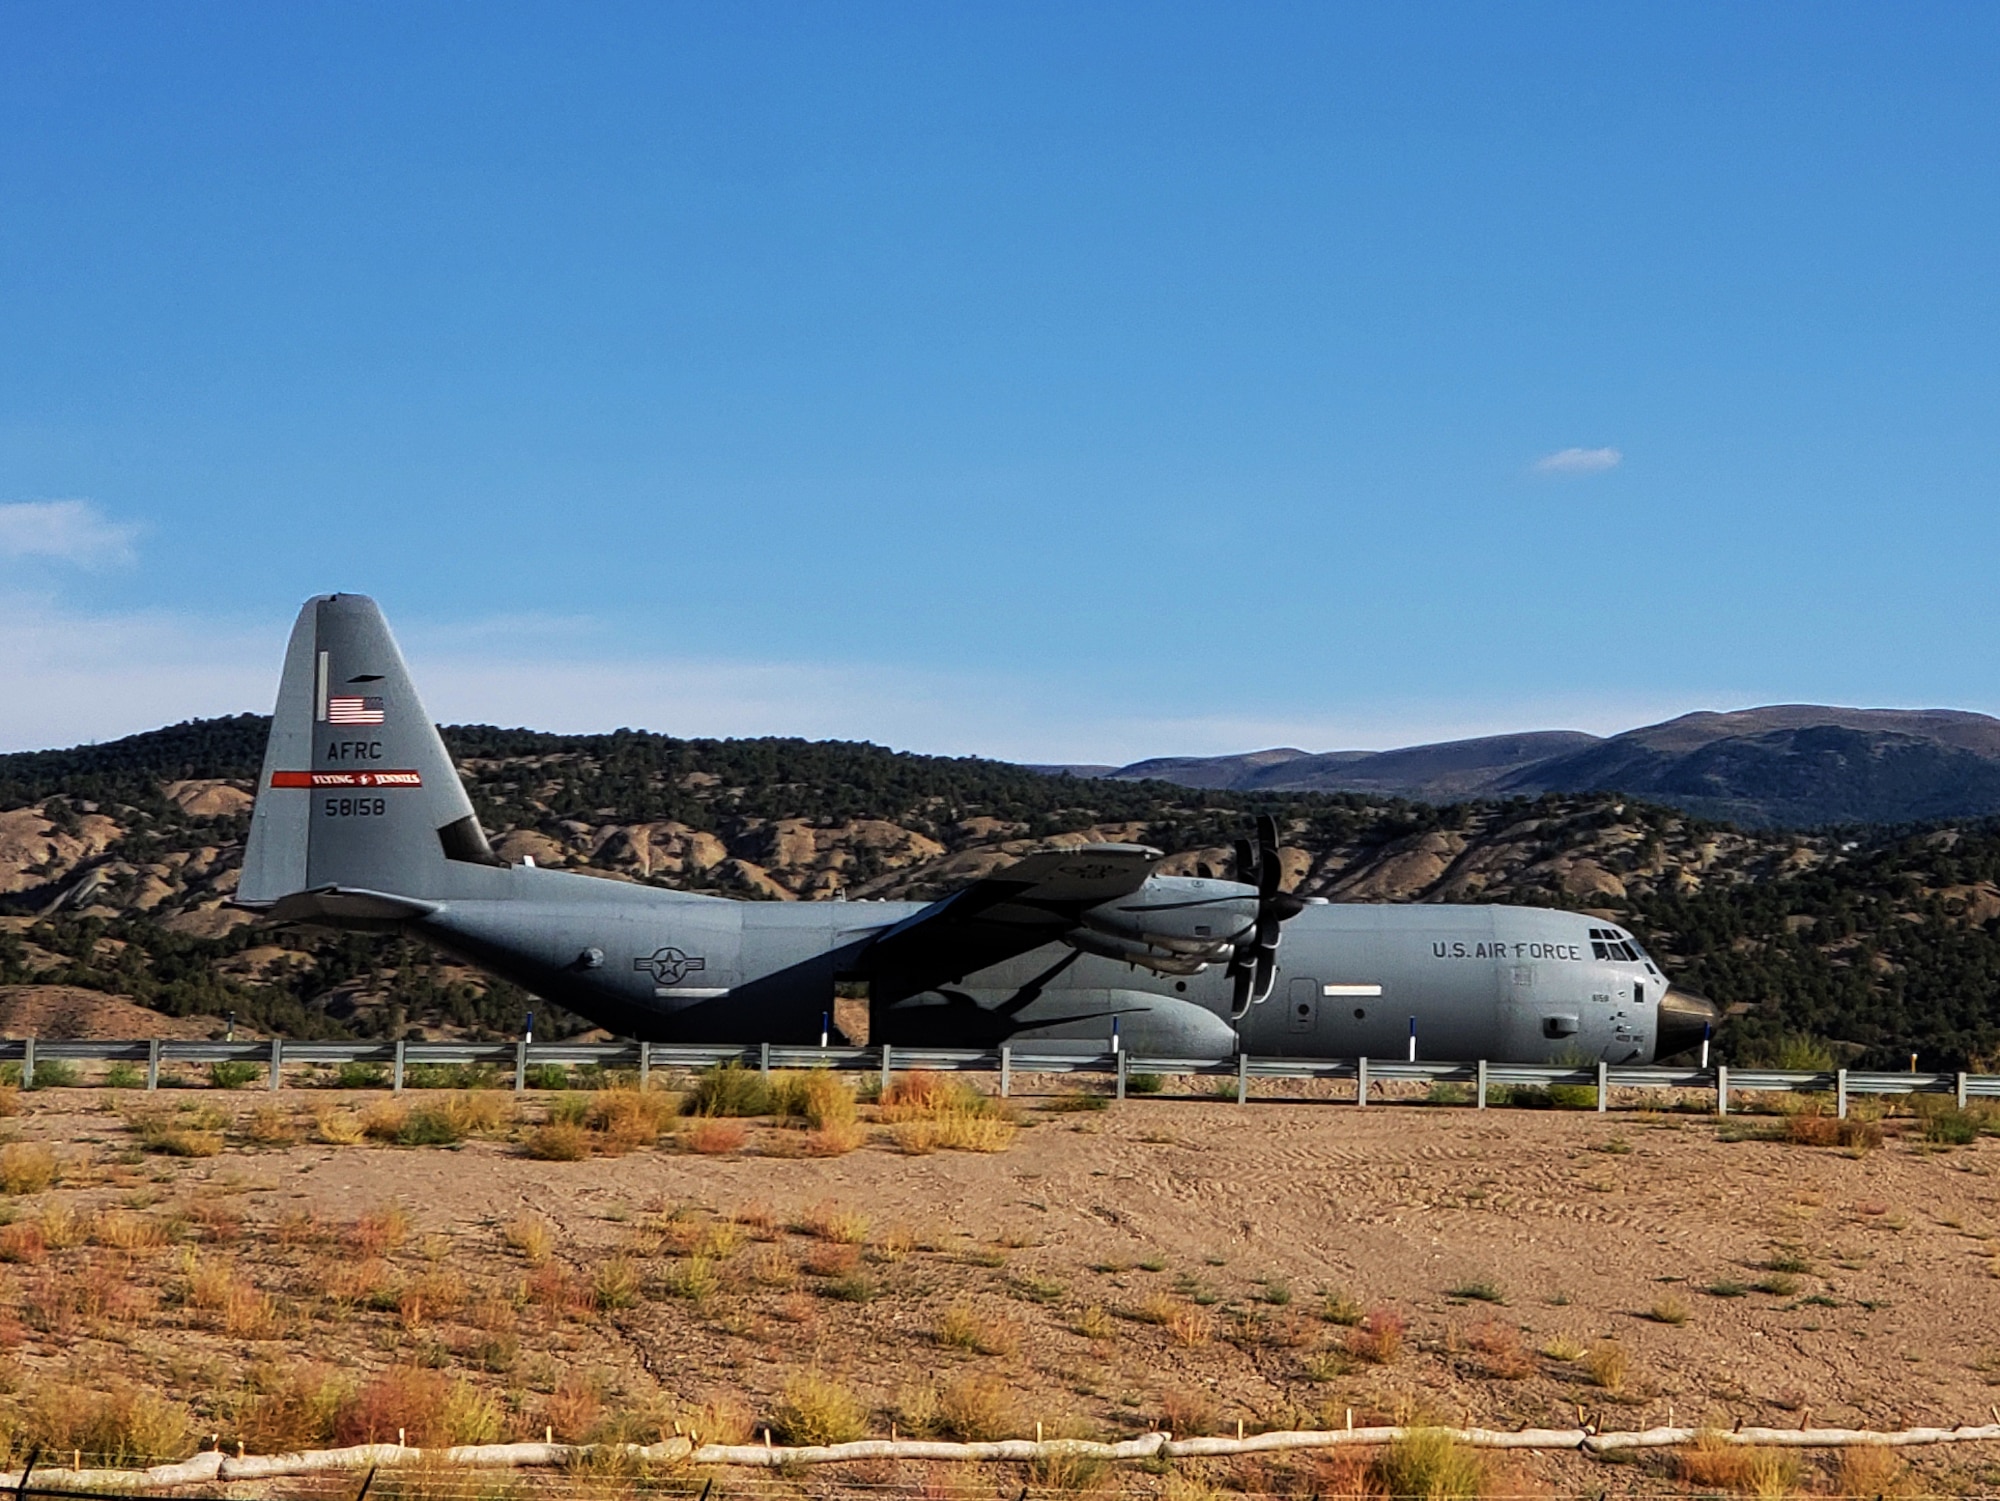 The 815th Airlift Squadron C-130J Super Hercules parked after landing at the Vail Valley Jet Center, Gypsum, Colorado after the airdrop at Taylor Park, Colorado during the 22nd Air Force’s flagship exercise Rally in the Rockies Sept. 13-17, 2021. The exercise is designed to develop Airmen for combat operations by challenging them with realistic scenarios that support a full spectrum of operations during military actions, operations or hostile environments. (U.S. Air Force photo by Master Sgt. Jessica Kendziorek)